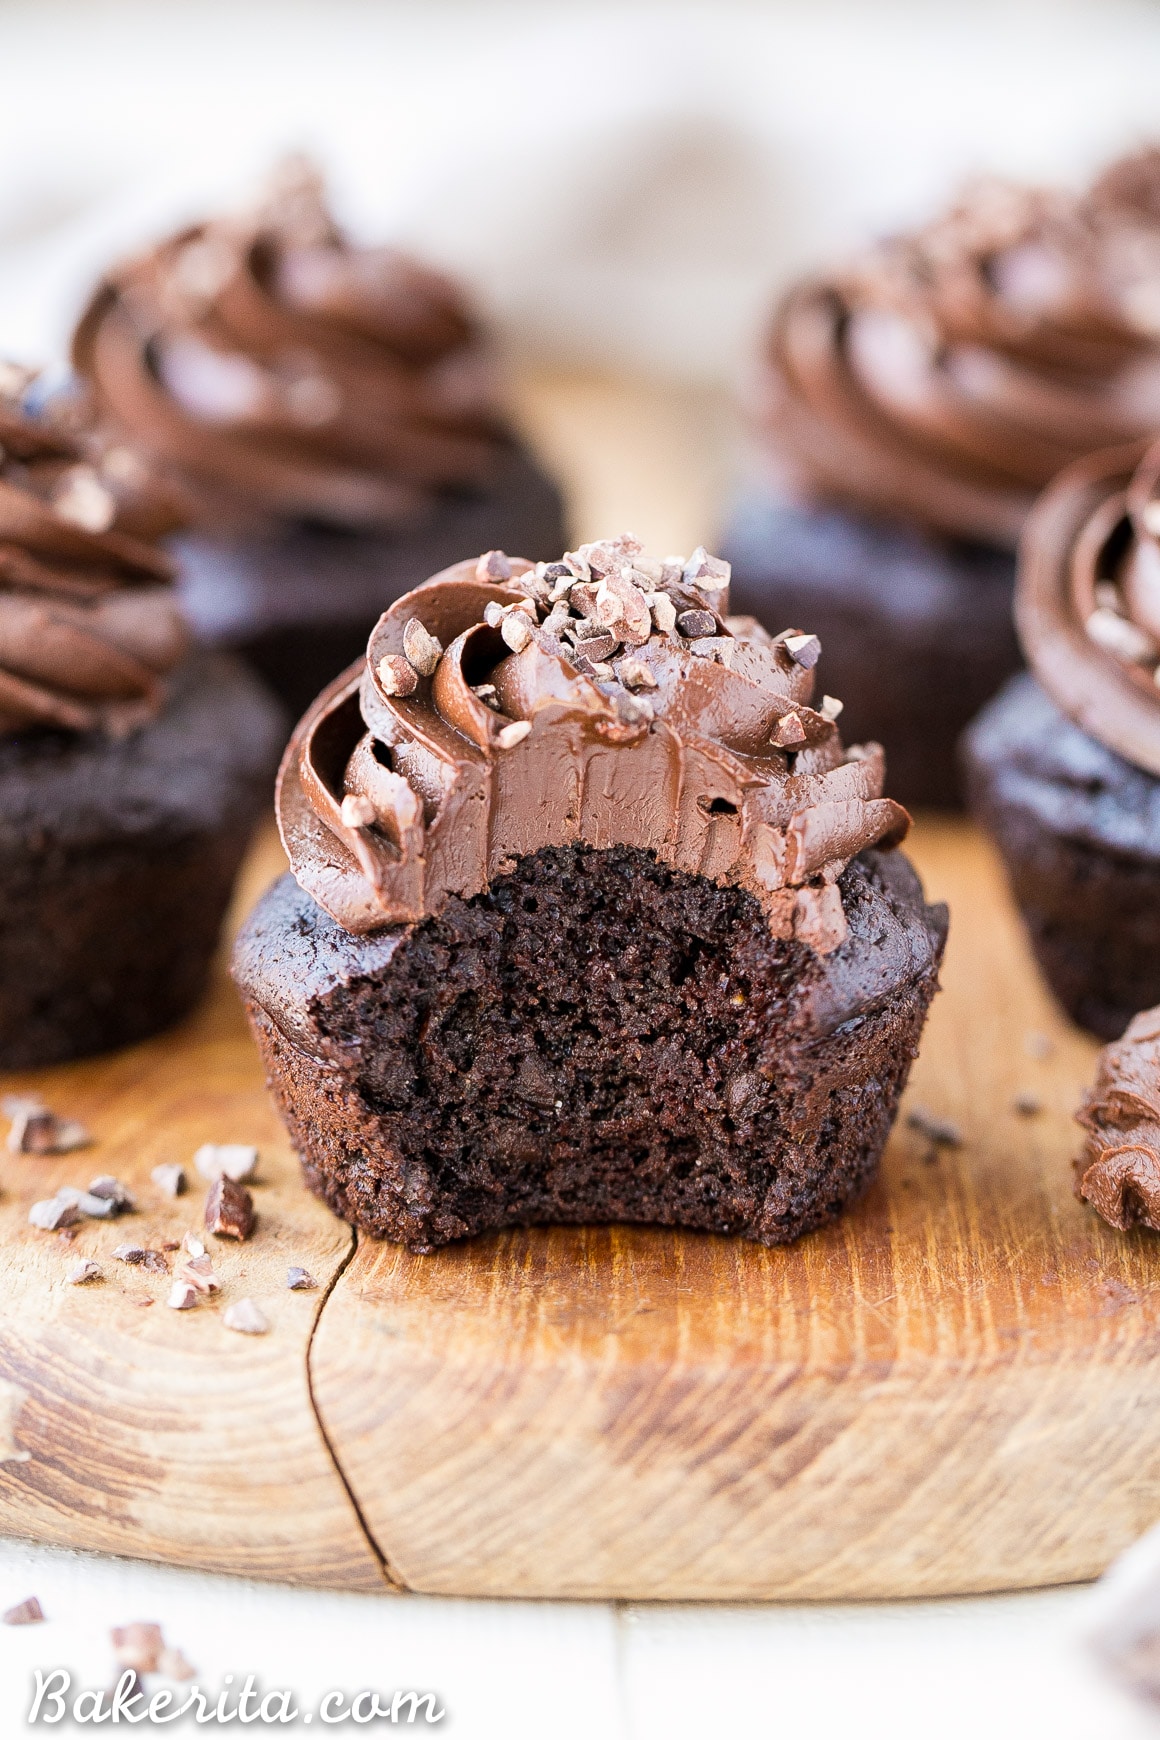 These Paleo Chocolate Zucchini Cupcakes are topped with a rich and fudgy Paleo Chocolate Frosting! You'd never guess there are veggies packed into these super moist and chocolatey cupcakes.